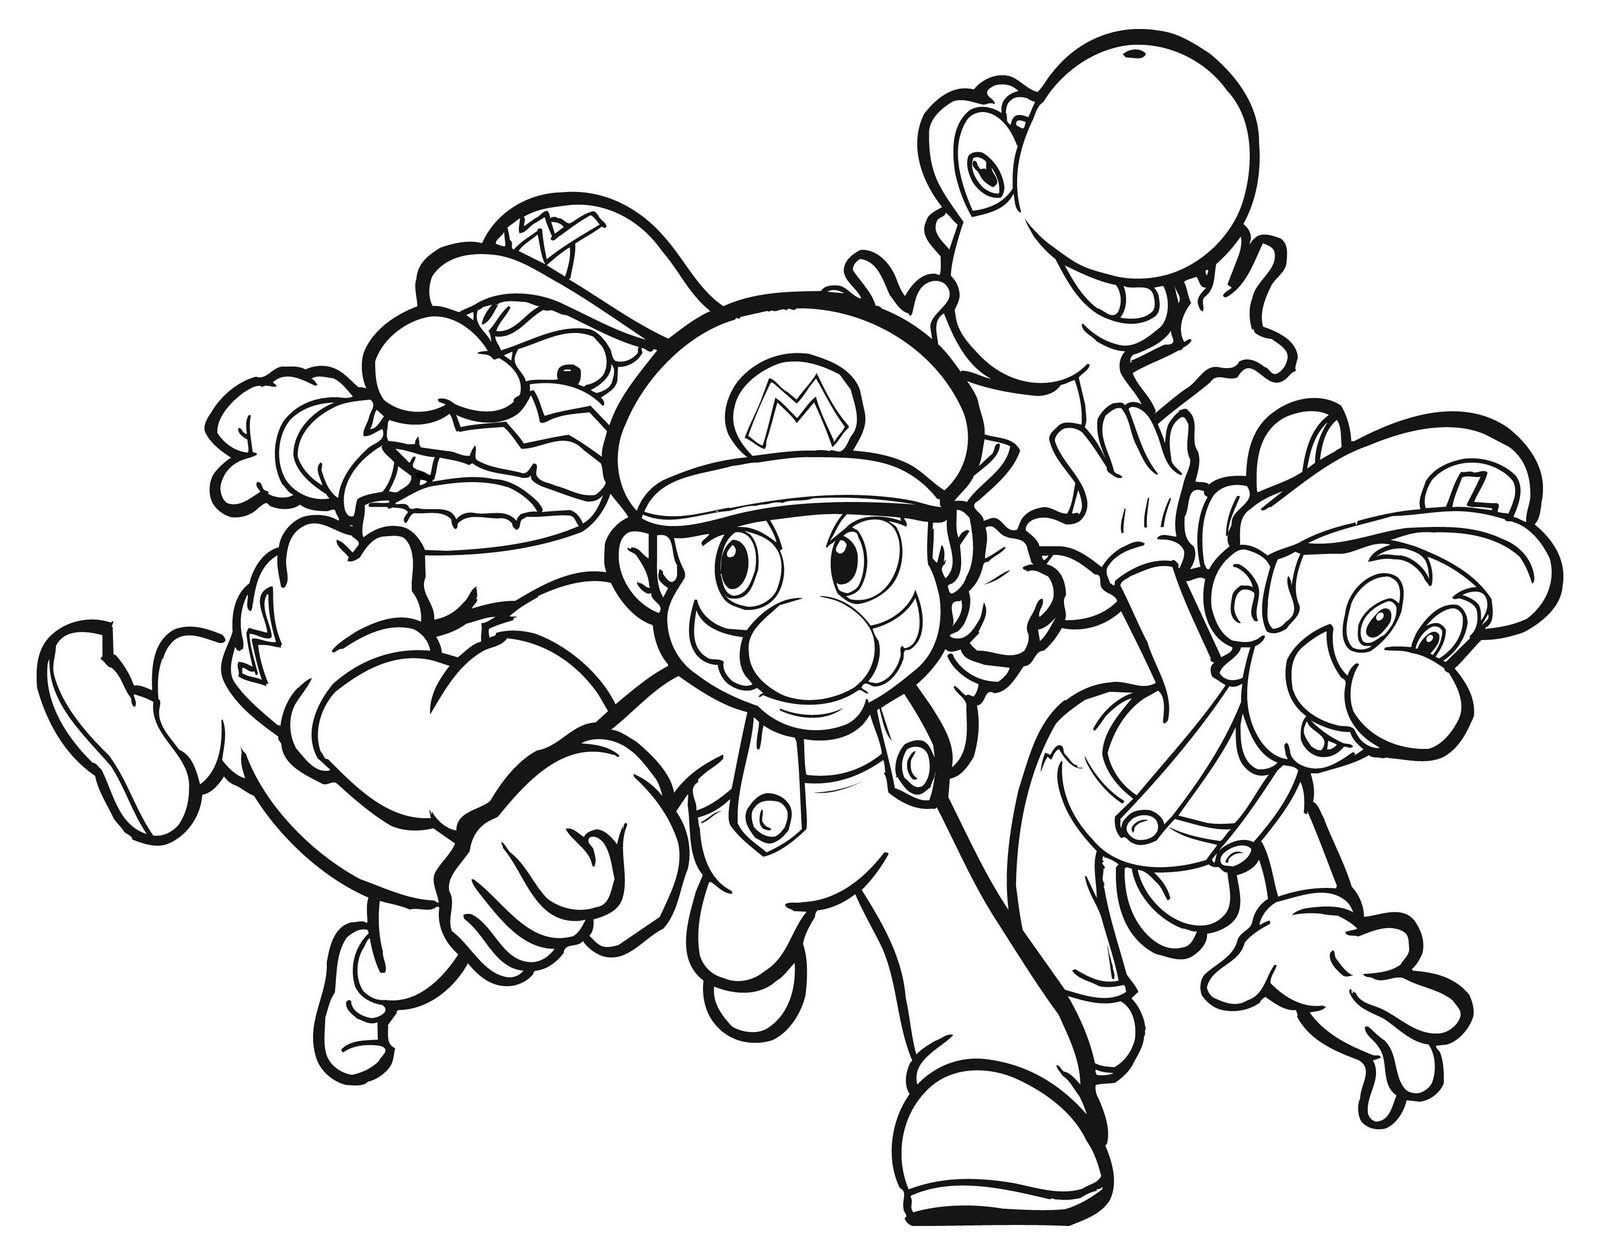 Free Printable Mario Coloring Pages For Kids Abstracte